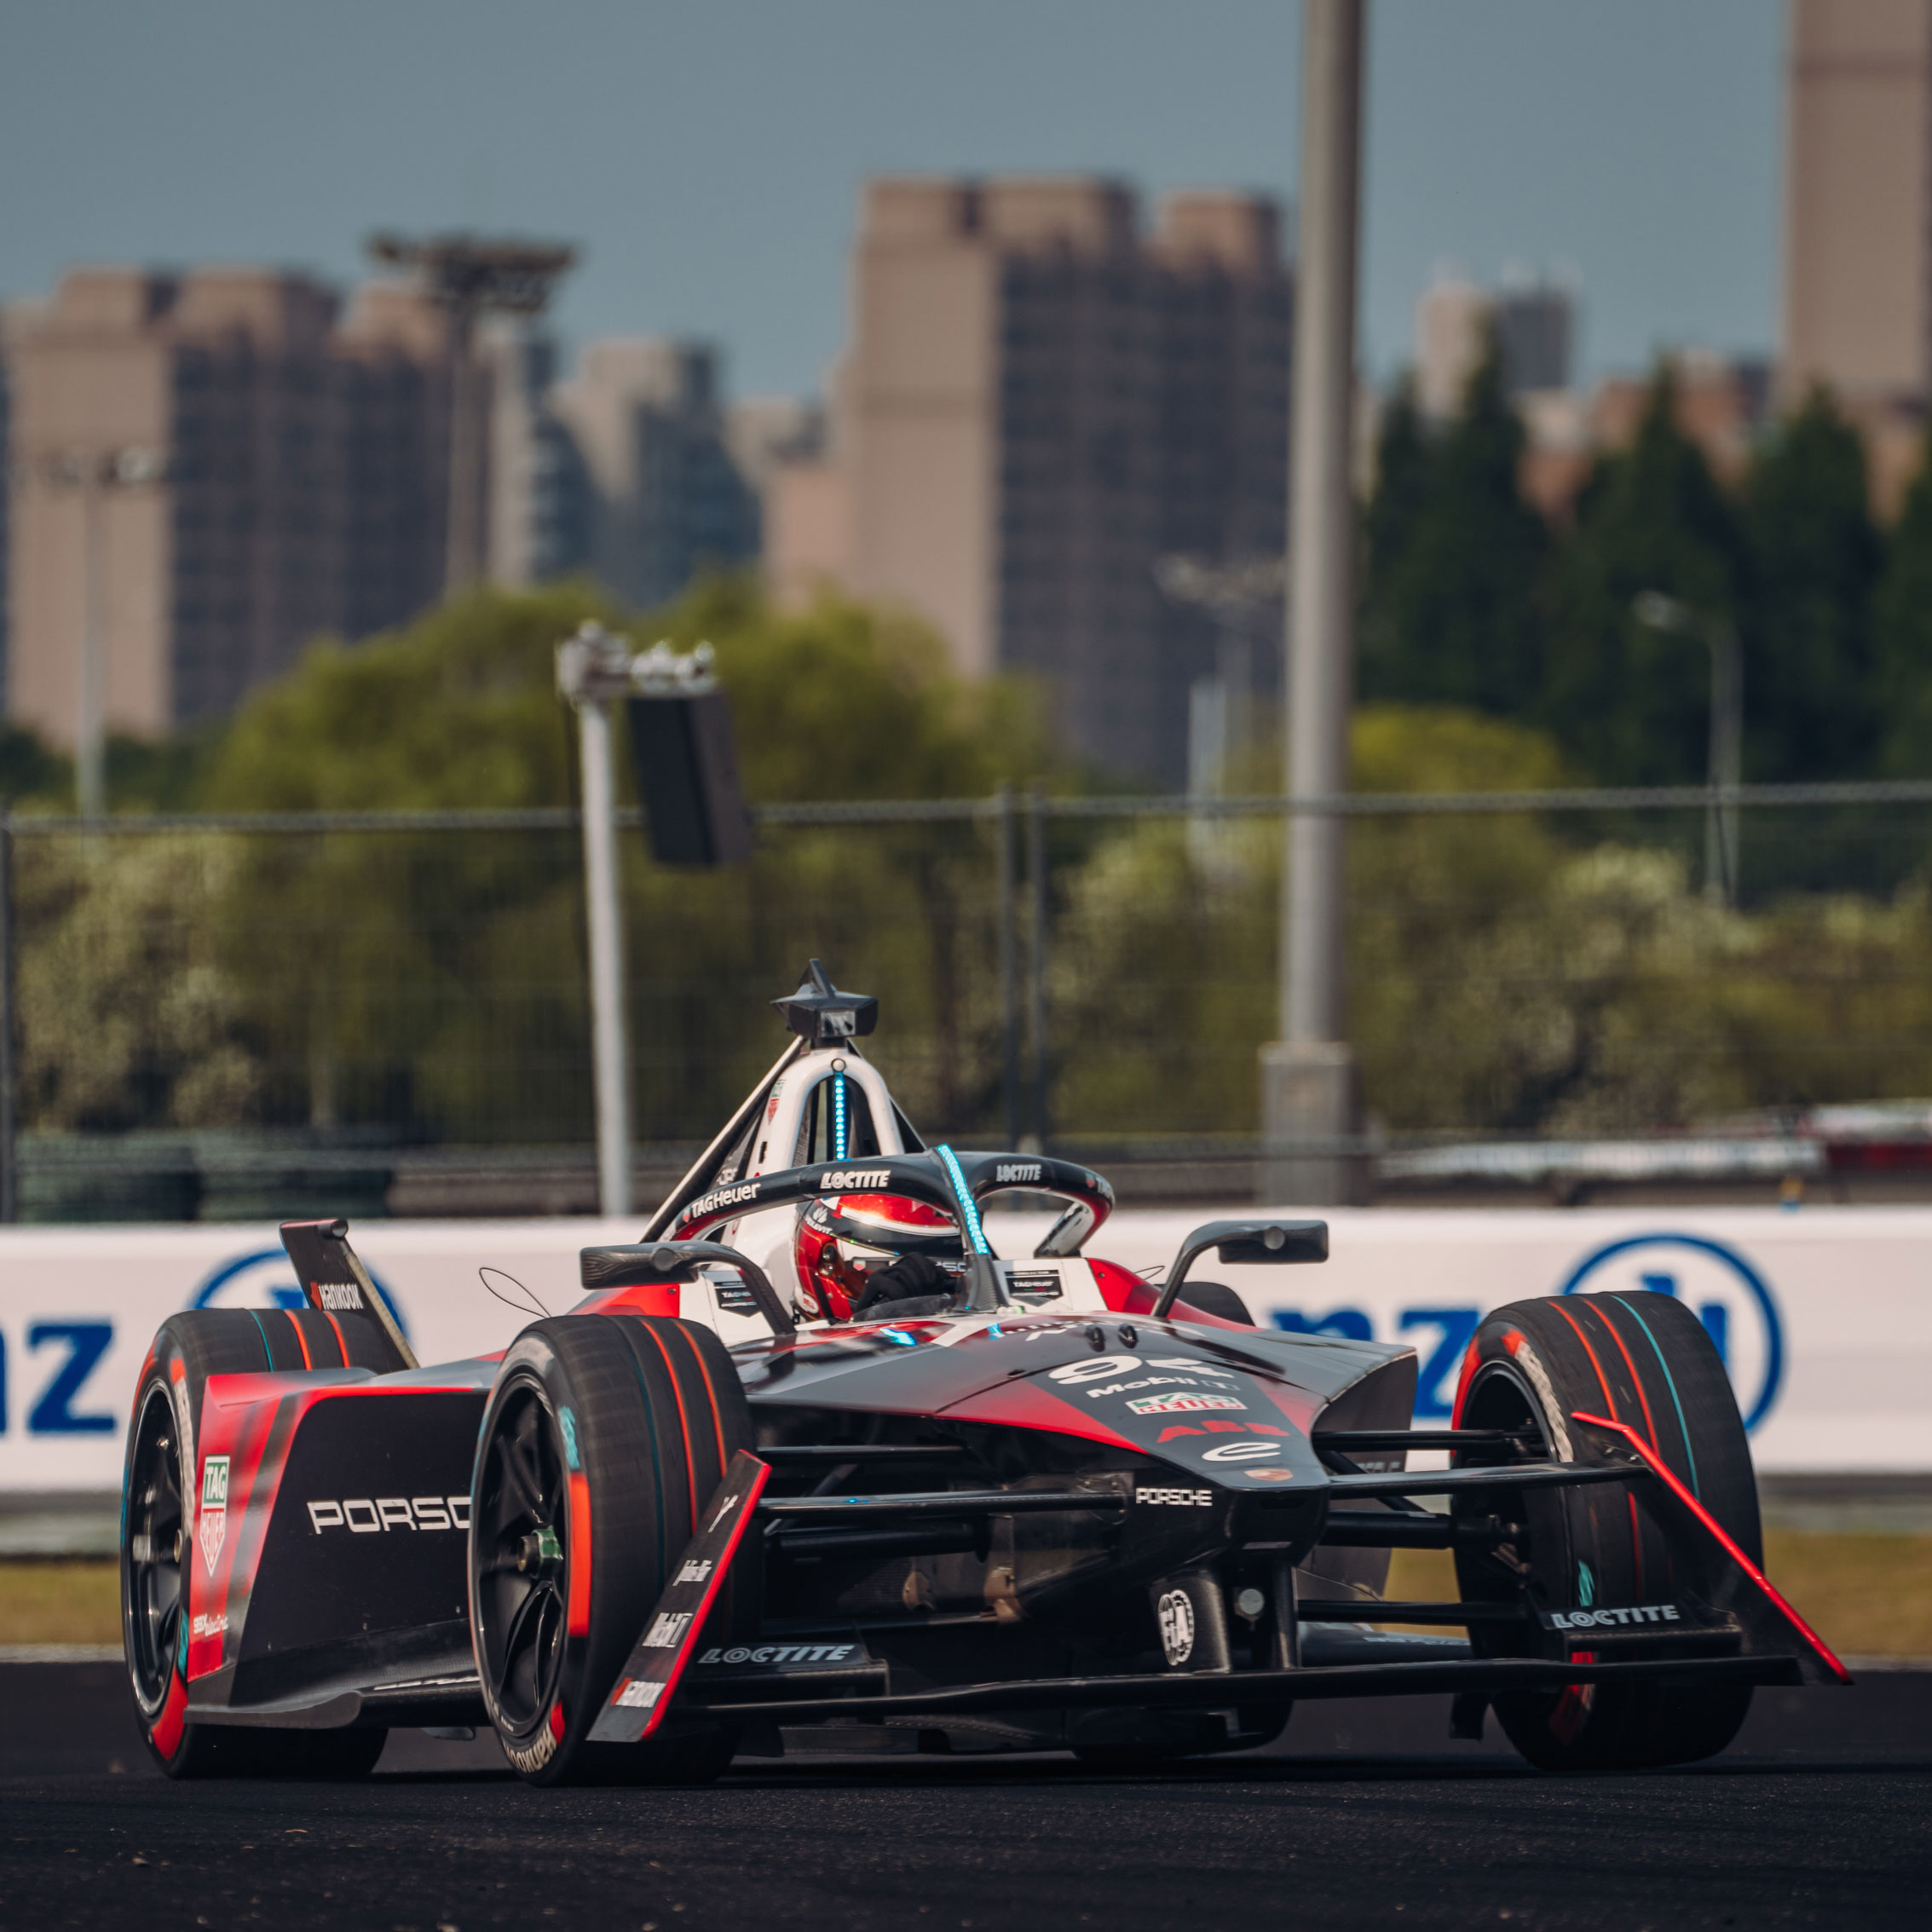 UNAVOIDABLE PUNCTURE BRINGS AN END TO WEHRLEIN’S SHANGHAI E-PRIX